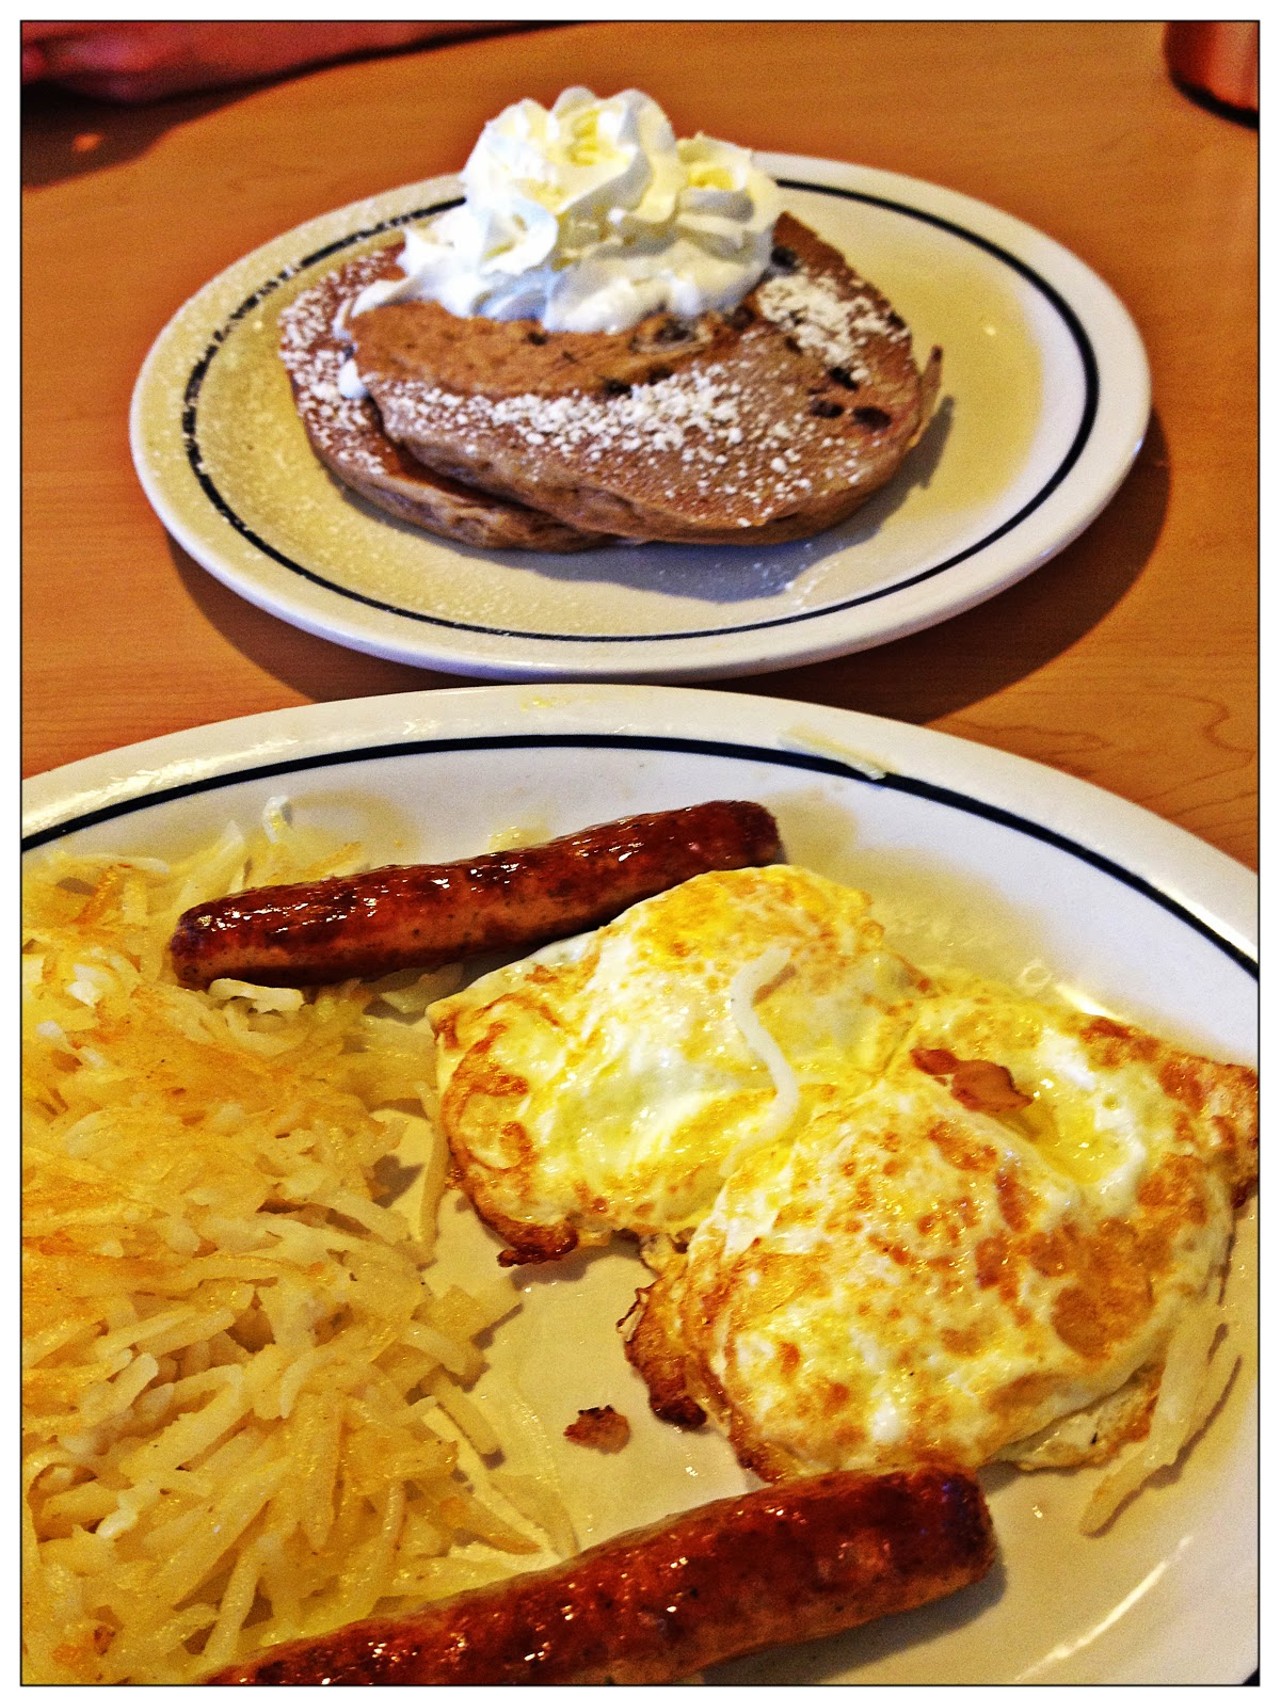 Join the IHOP Pancake Revolution Club and your entire meal is free on your birthday.